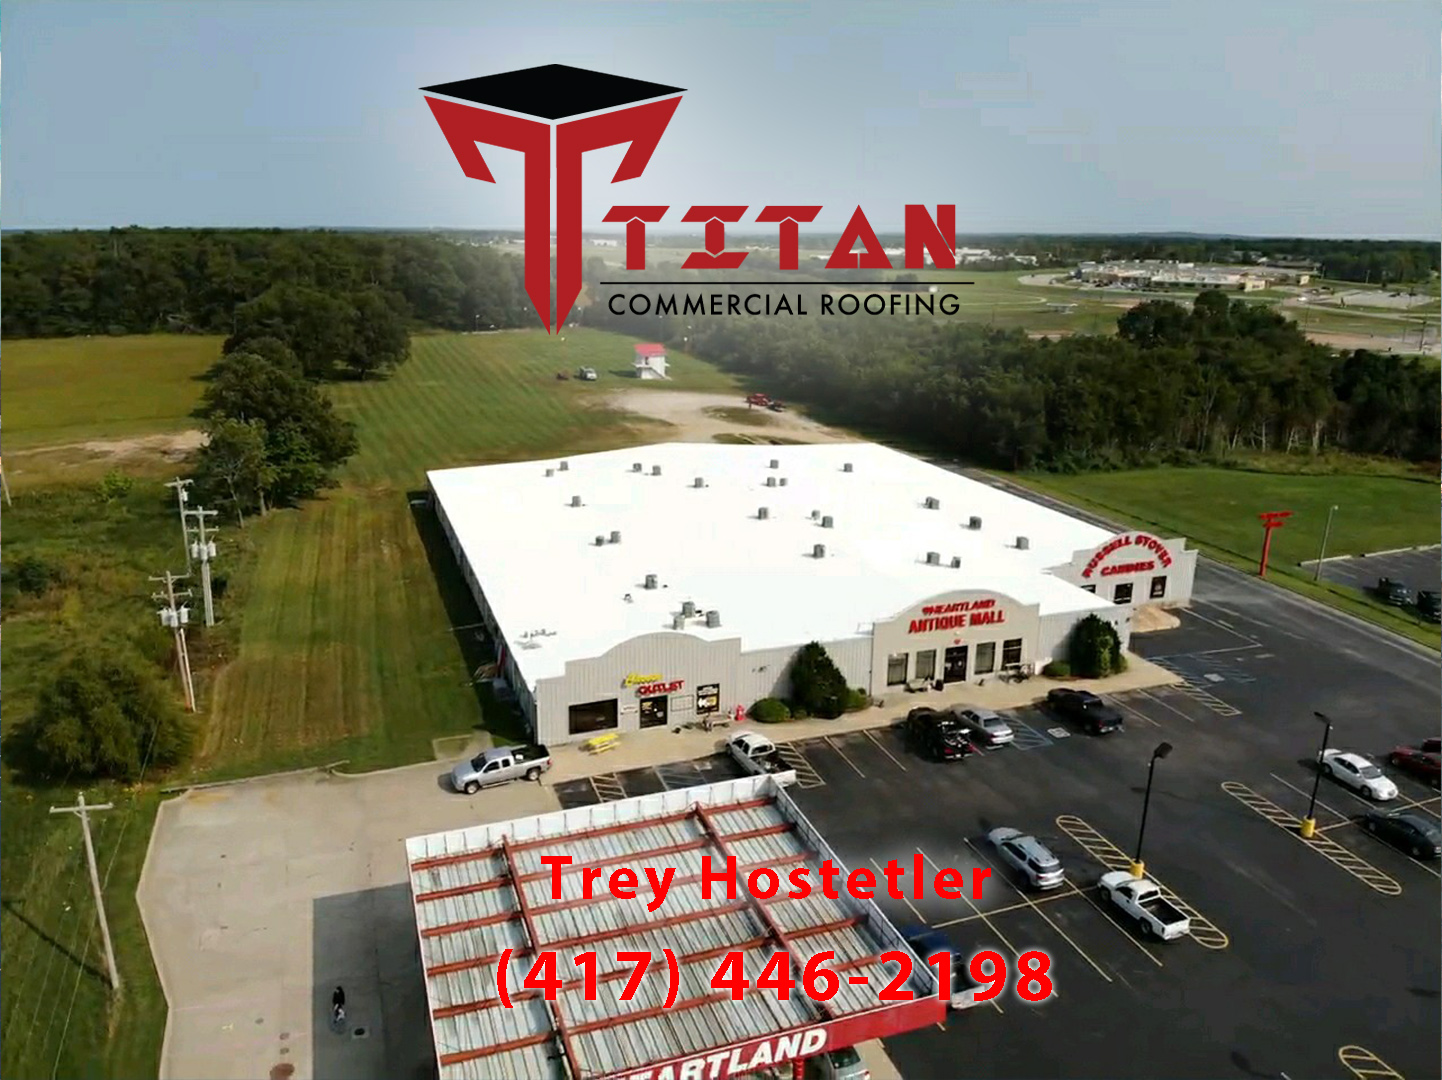 Titan Commercial Roofing